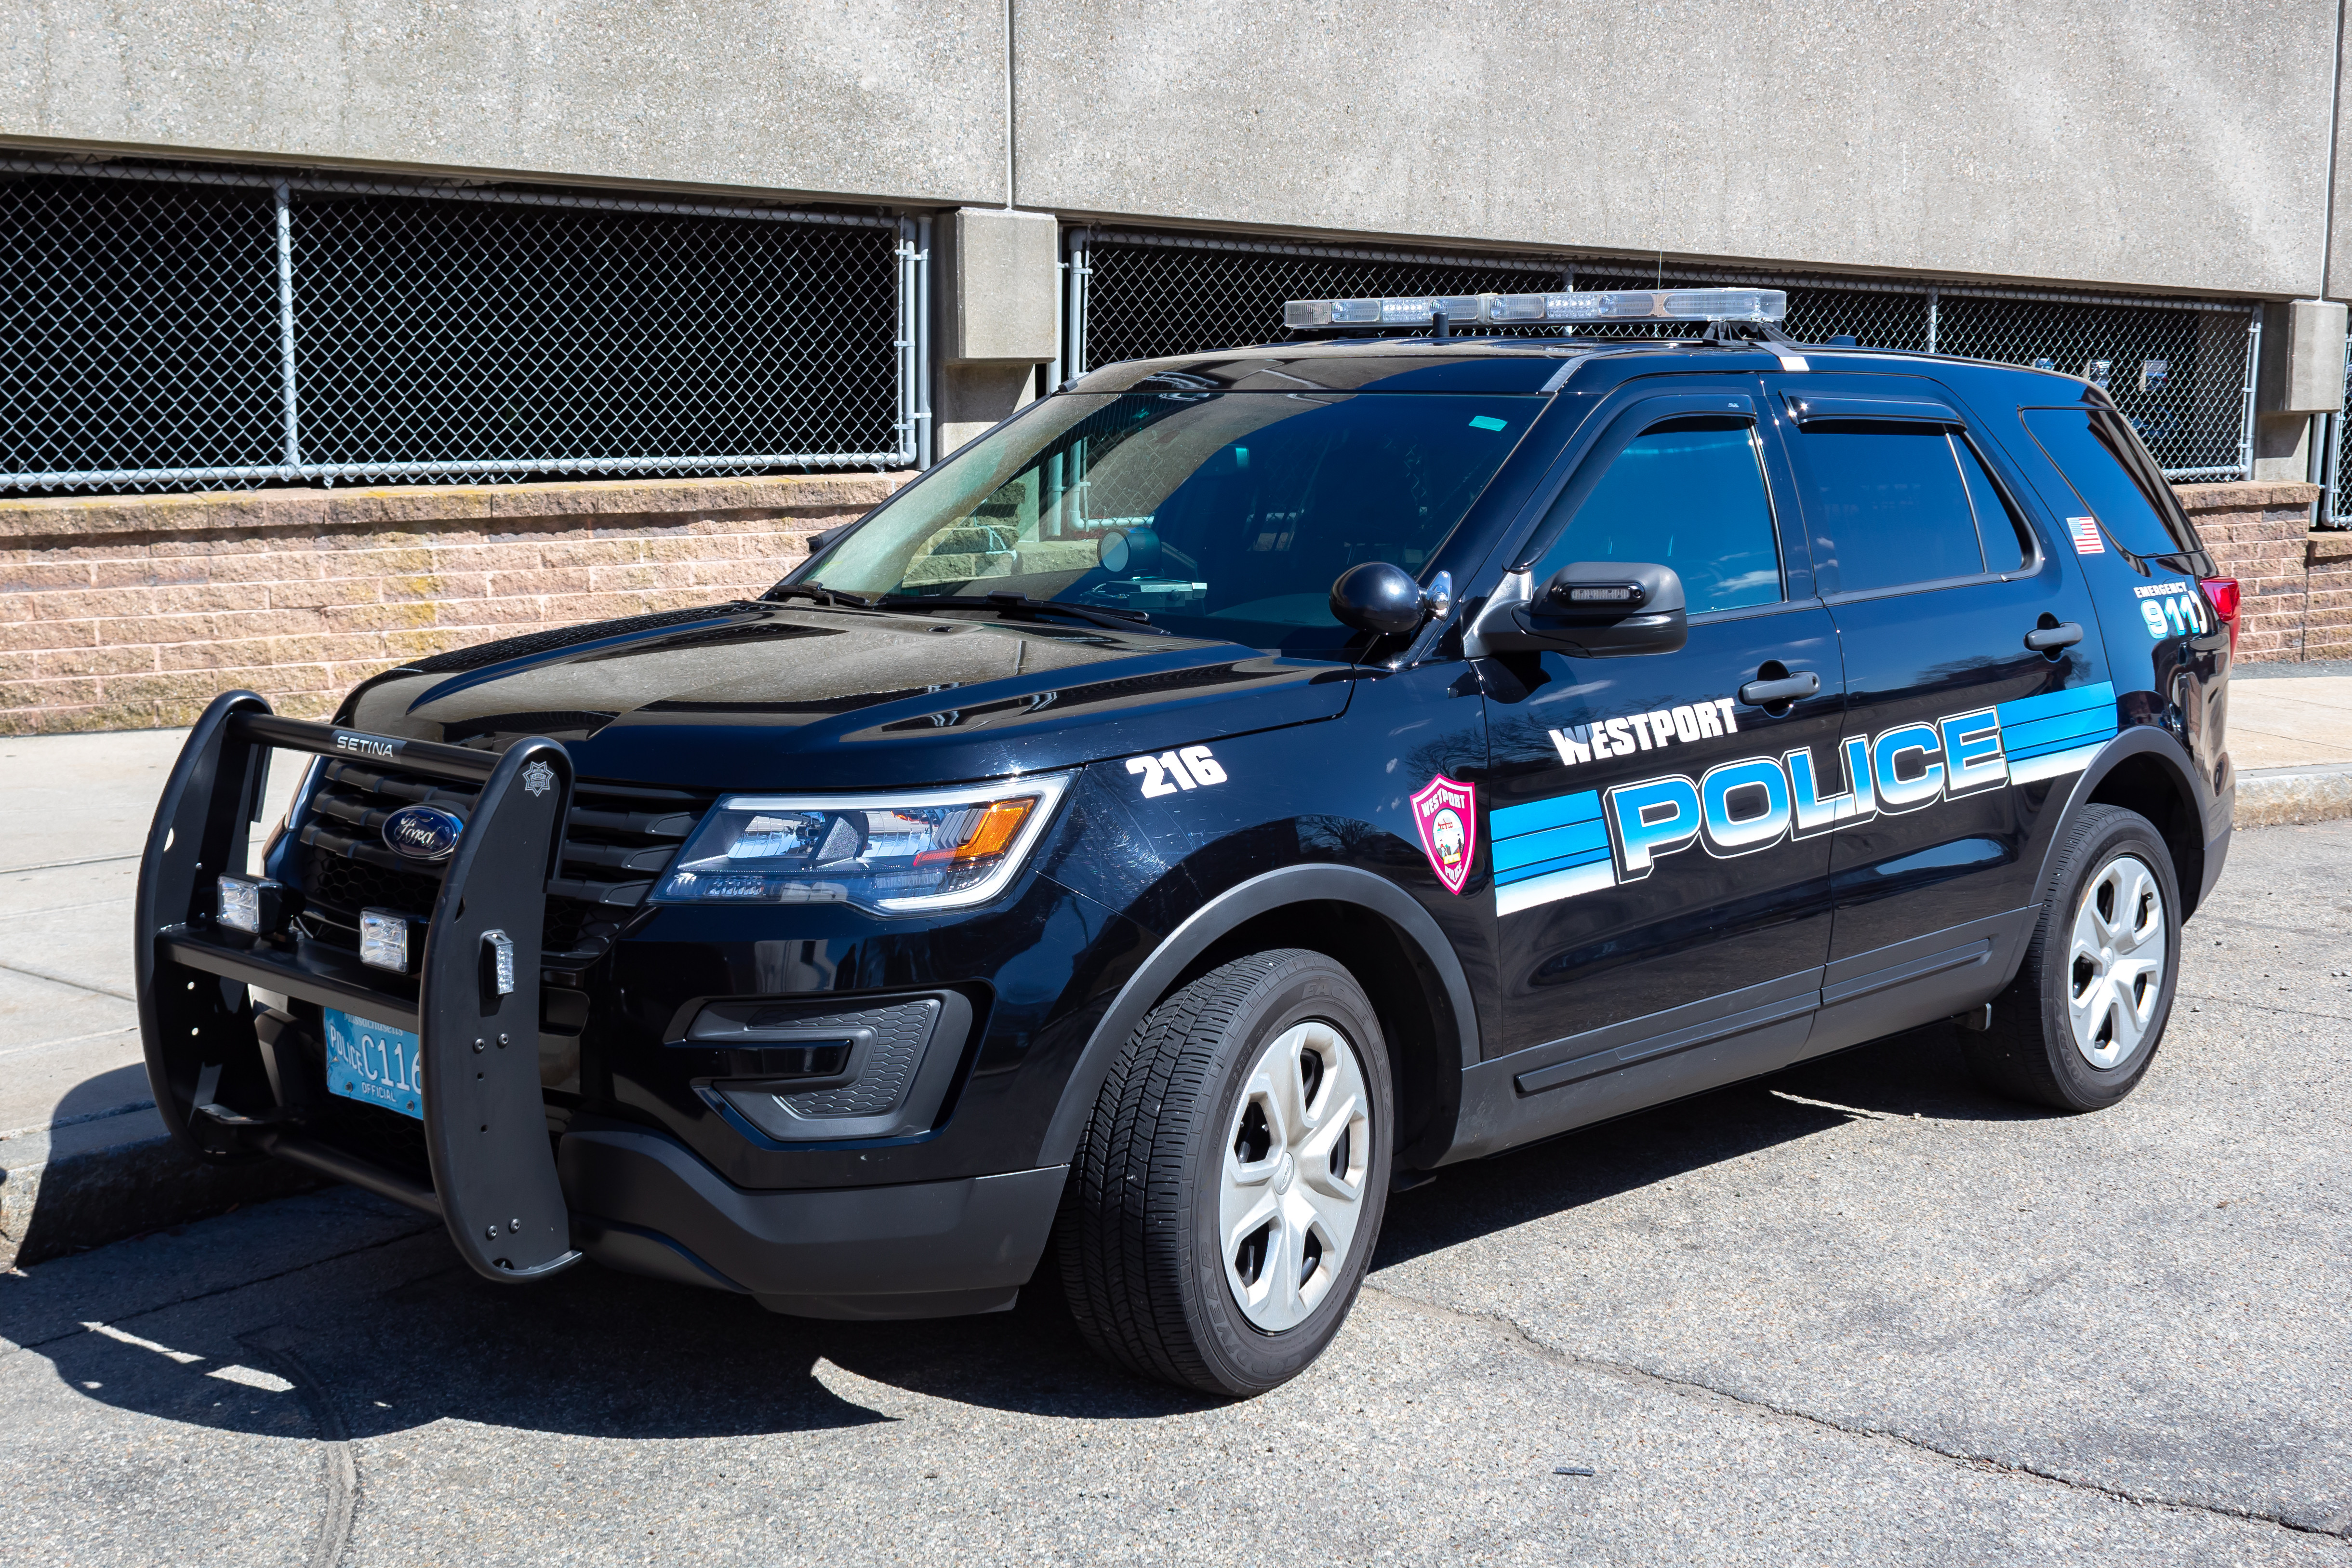 A photo  of Westport Police
            Cruiser 216, a 2016 Ford Police Interceptor Utility             taken by Corey Gillet